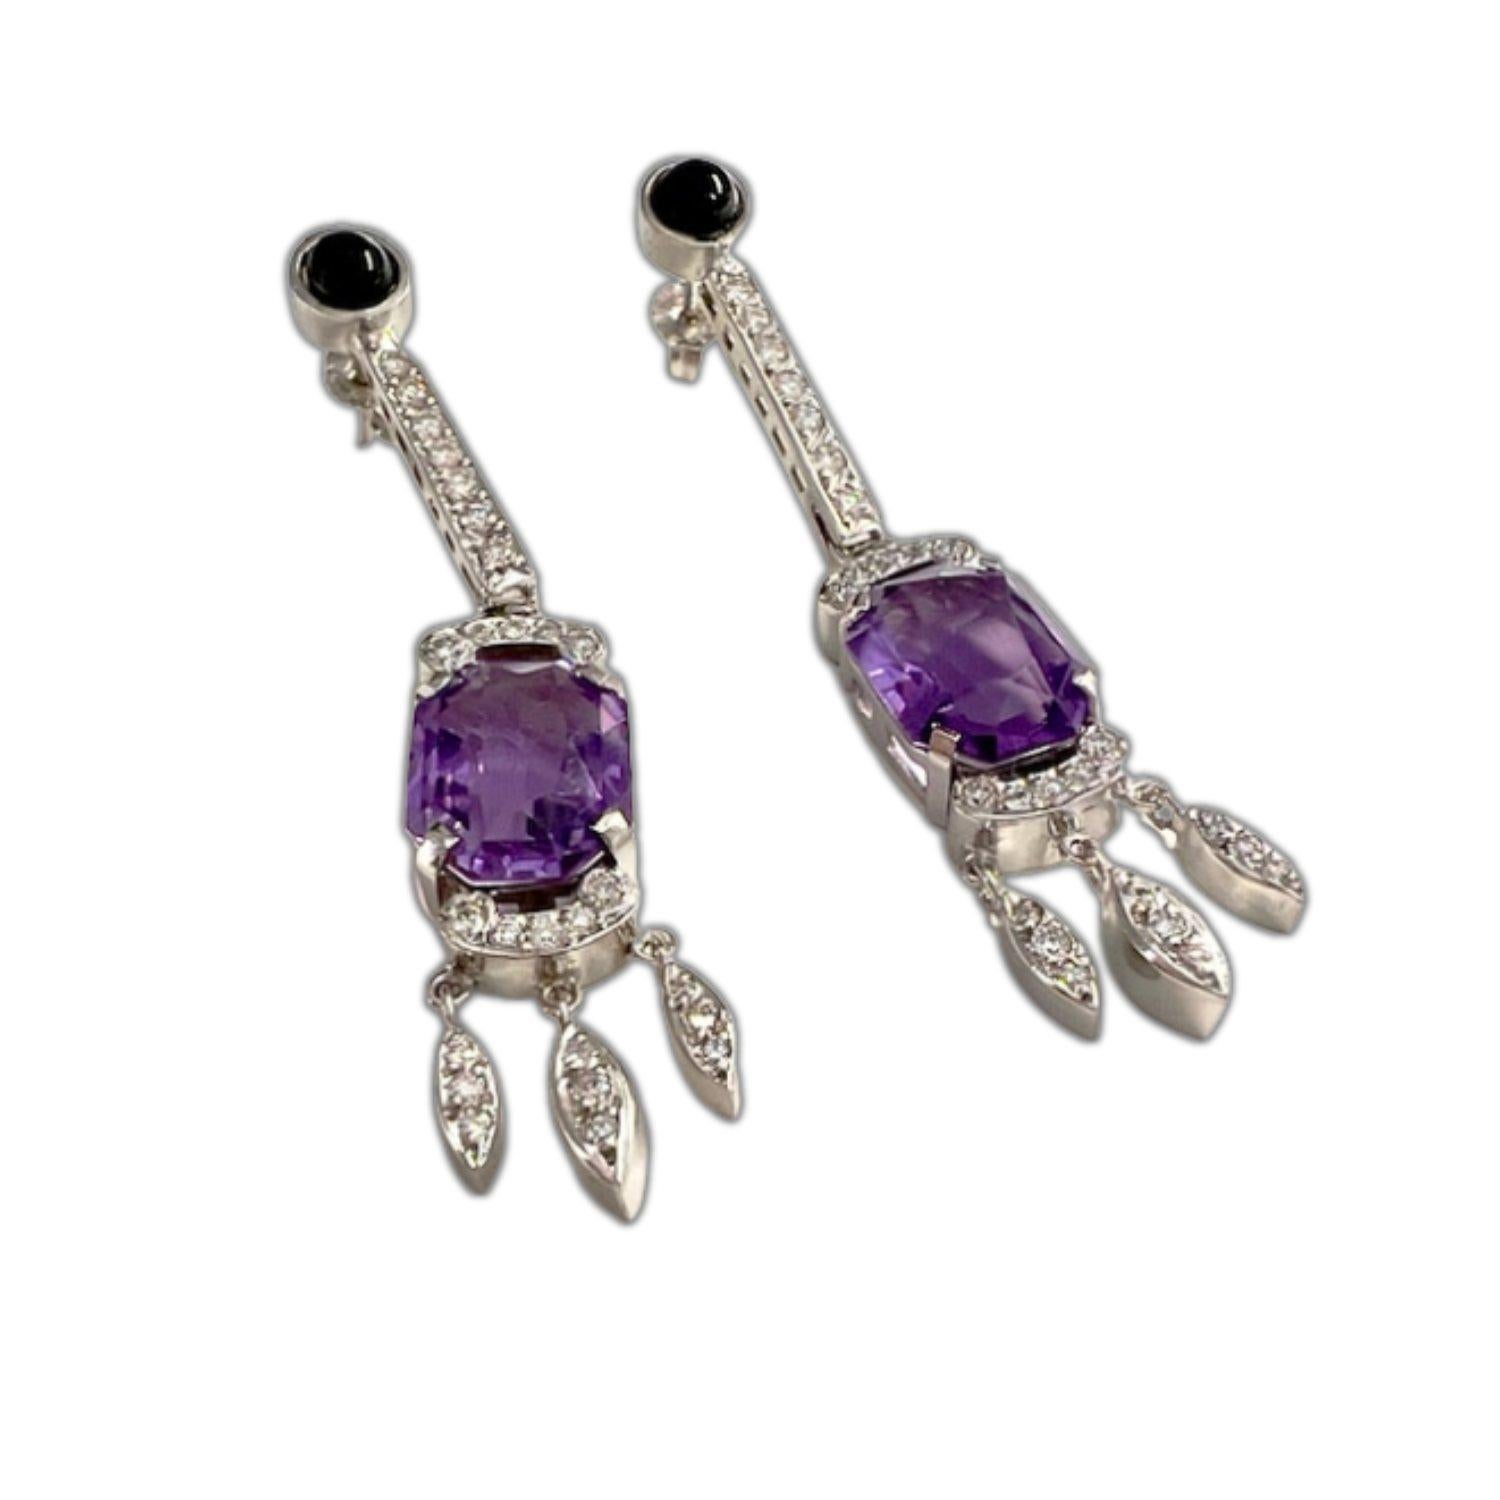 Women's Art Deco-Inspired with Diamonds, Onyx, and Amethysts white Gold Earrings For Sale